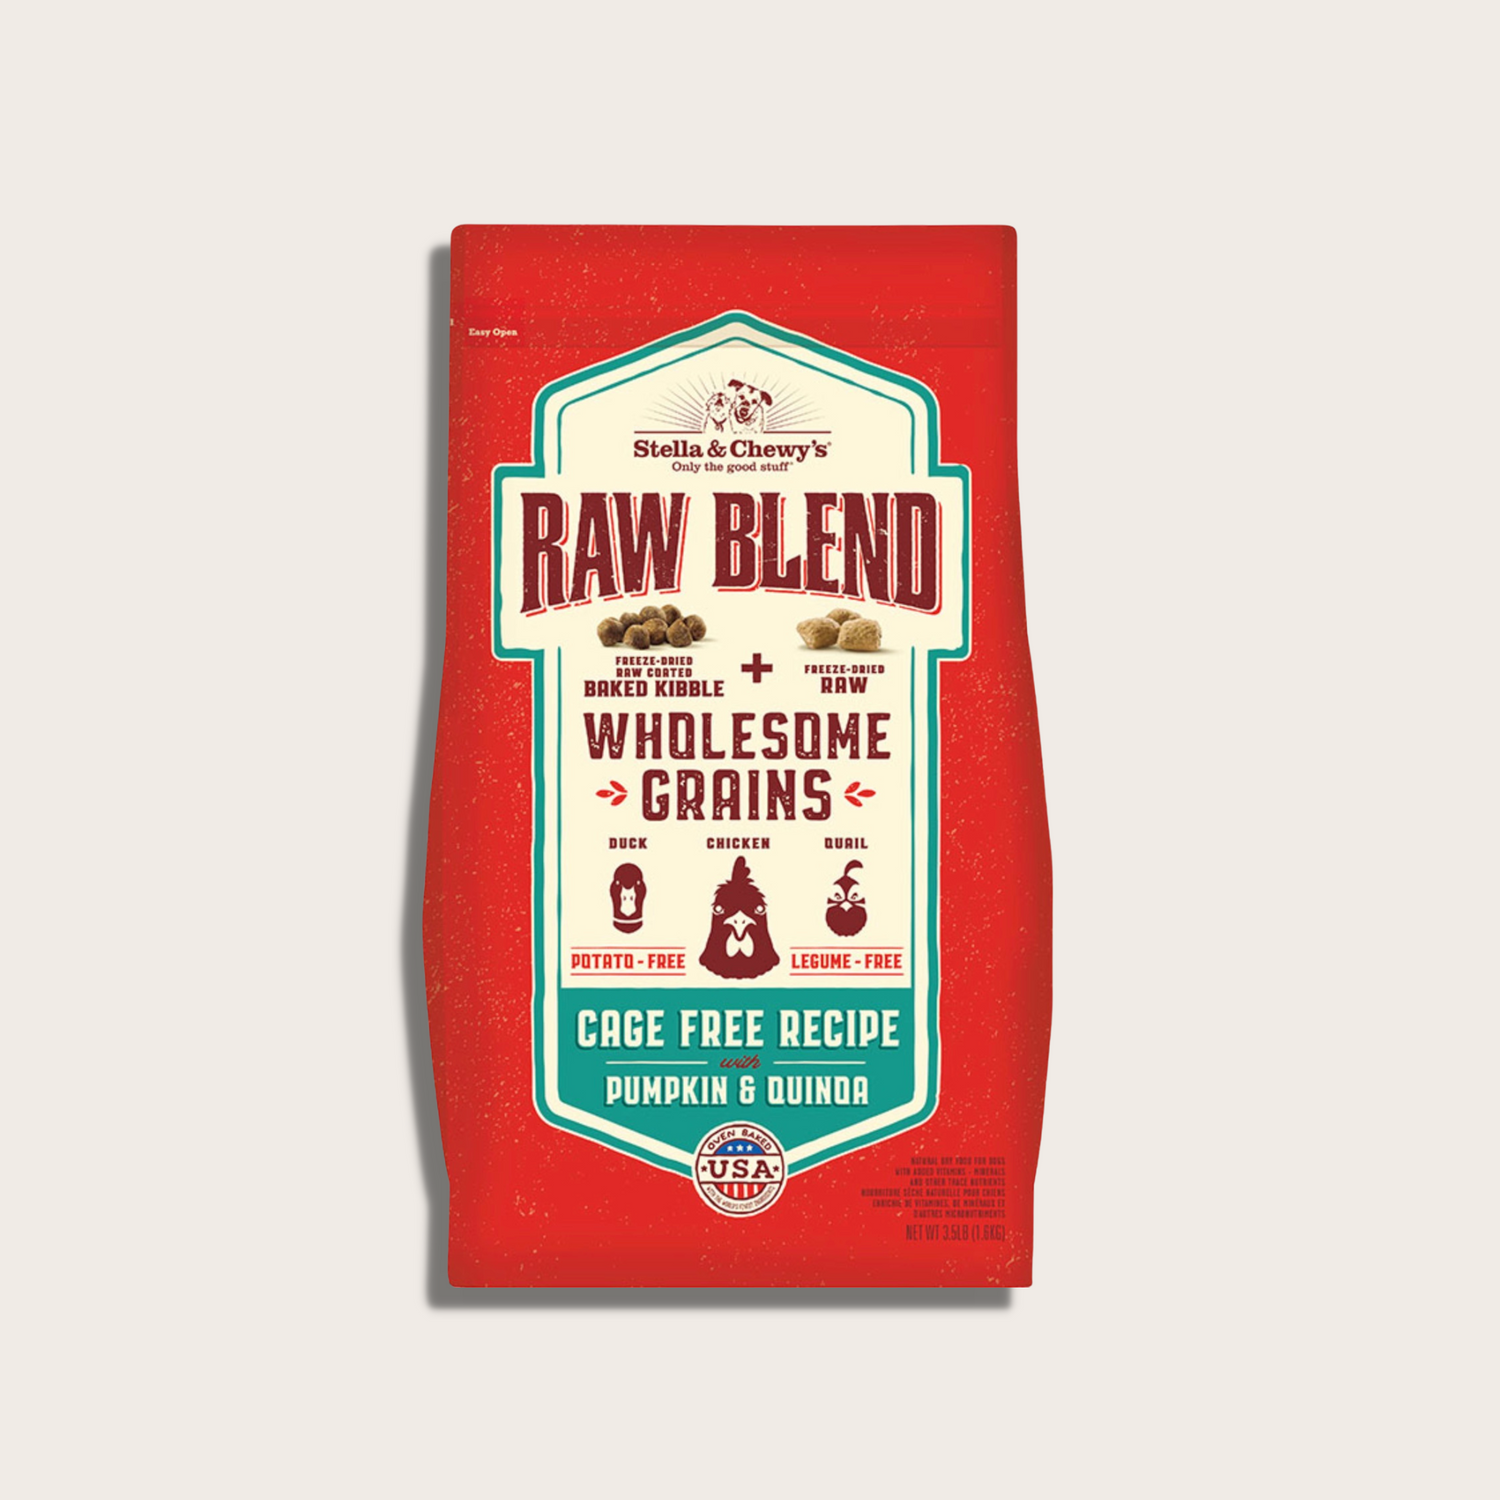 Stella & Chewy's Raw Blend Kibble - Wholesome Grains Cage Free Recipe for Dogs